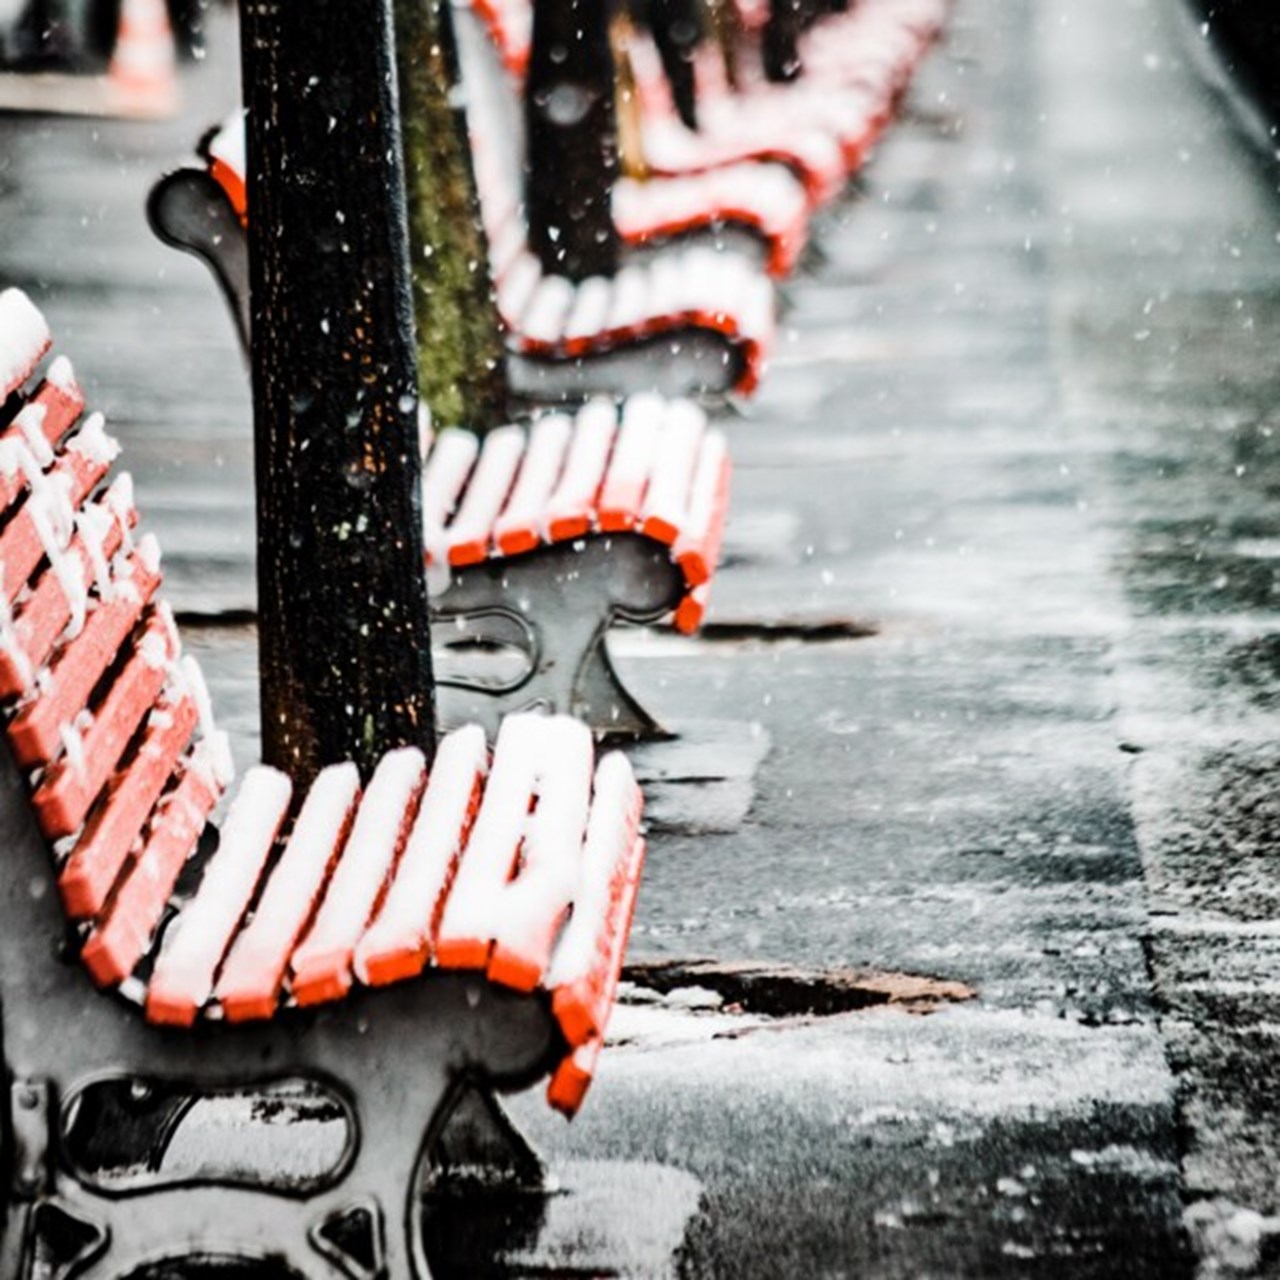 A long one with red wooden benches covered with snow on an icy street.